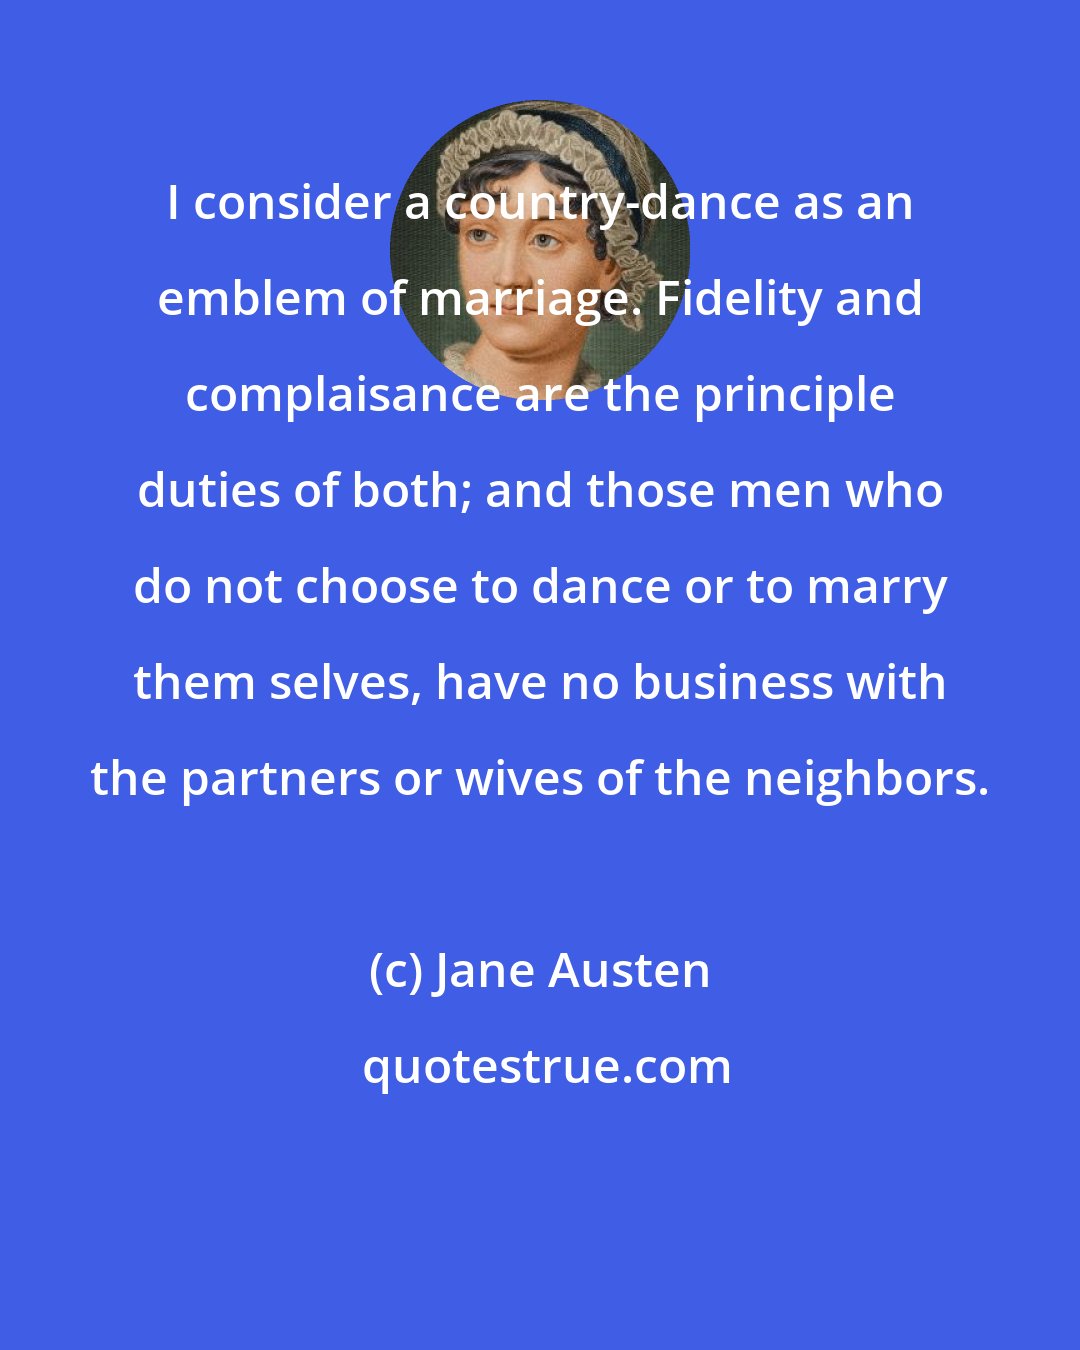 Jane Austen: I consider a country-dance as an emblem of marriage. Fidelity and complaisance are the principle duties of both; and those men who do not choose to dance or to marry them selves, have no business with the partners or wives of the neighbors.